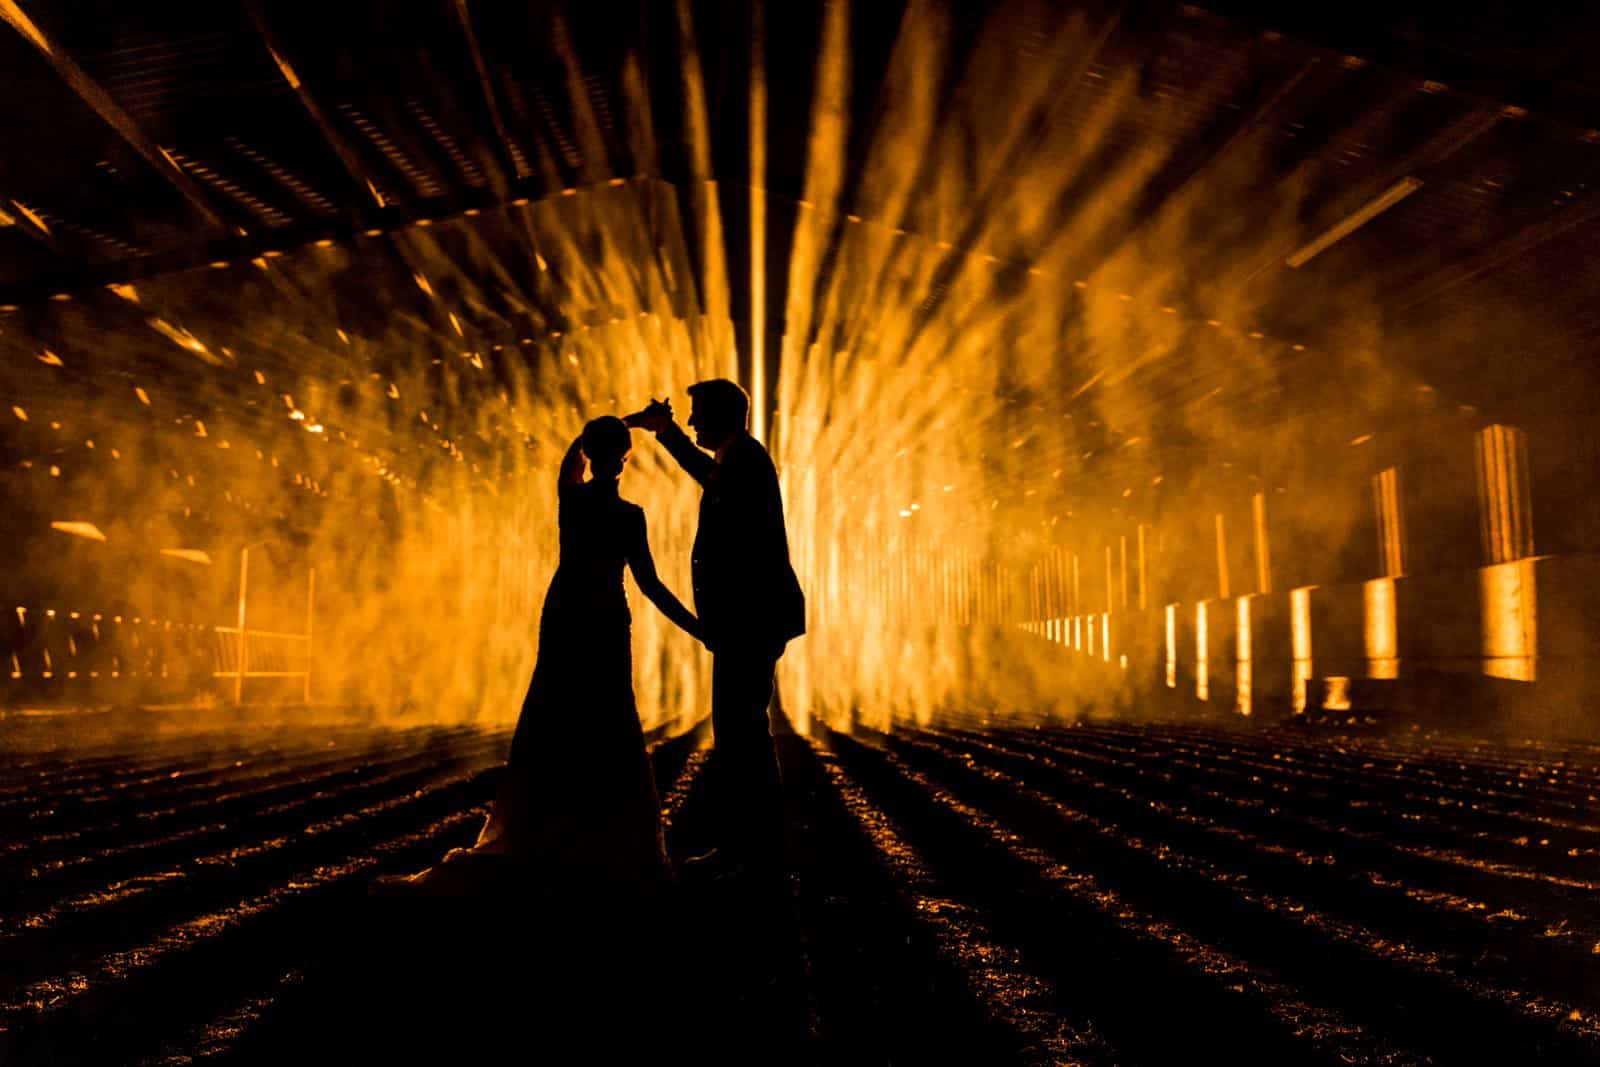 Stunning wedding silhouette photo of a couple in a barn at night, photo taken at Wood Farm Everdon